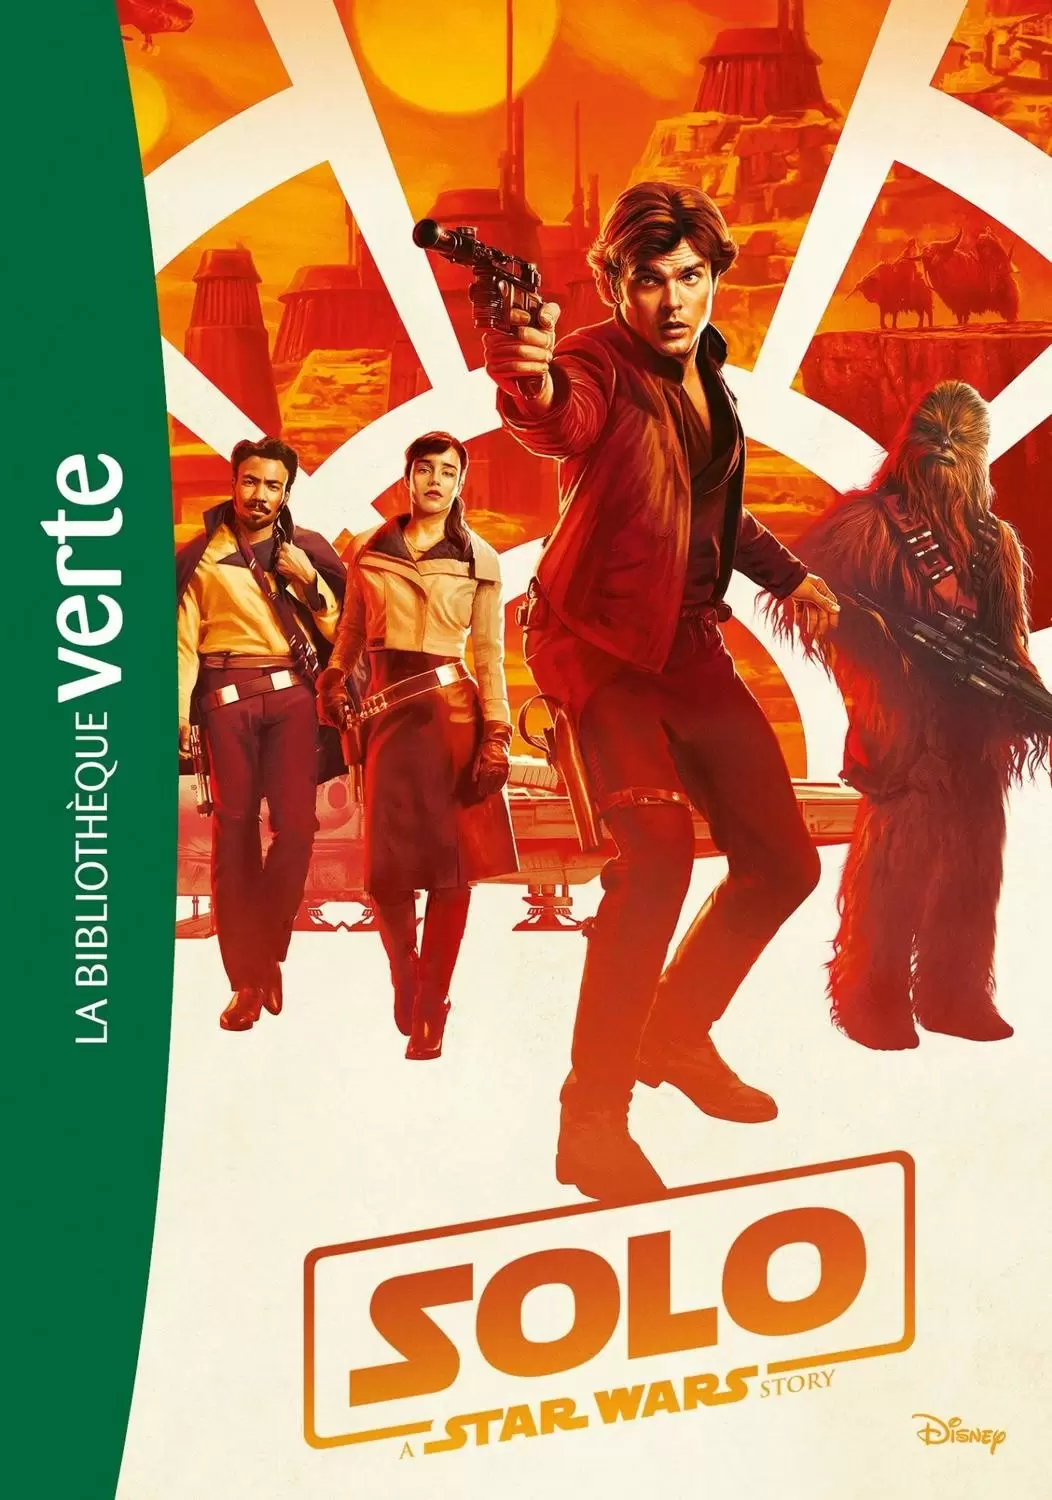 Star Wars - Solo : A Star Wars Story